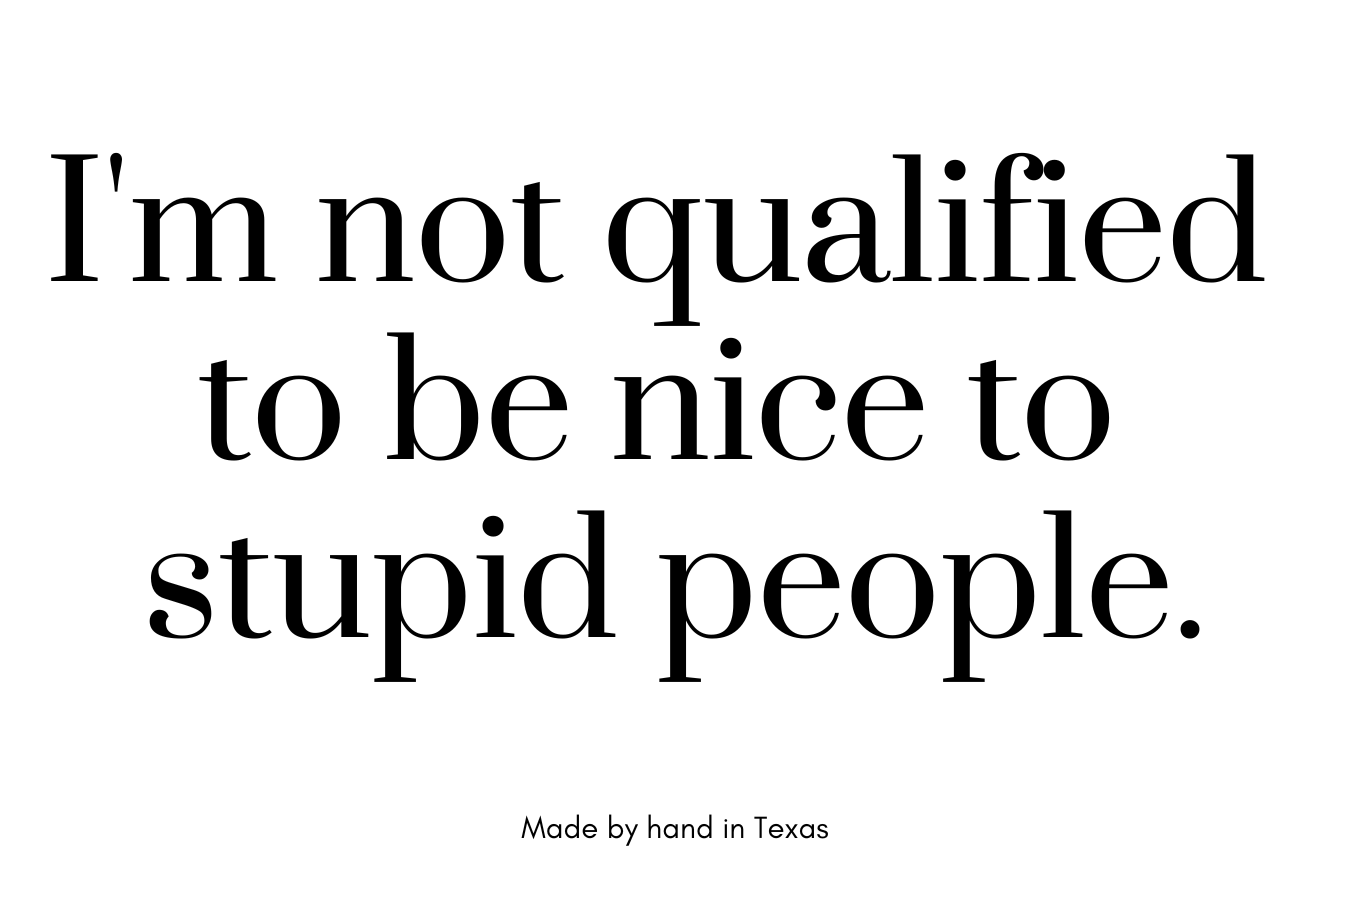 I'm not qualified to be nice to stupid people.